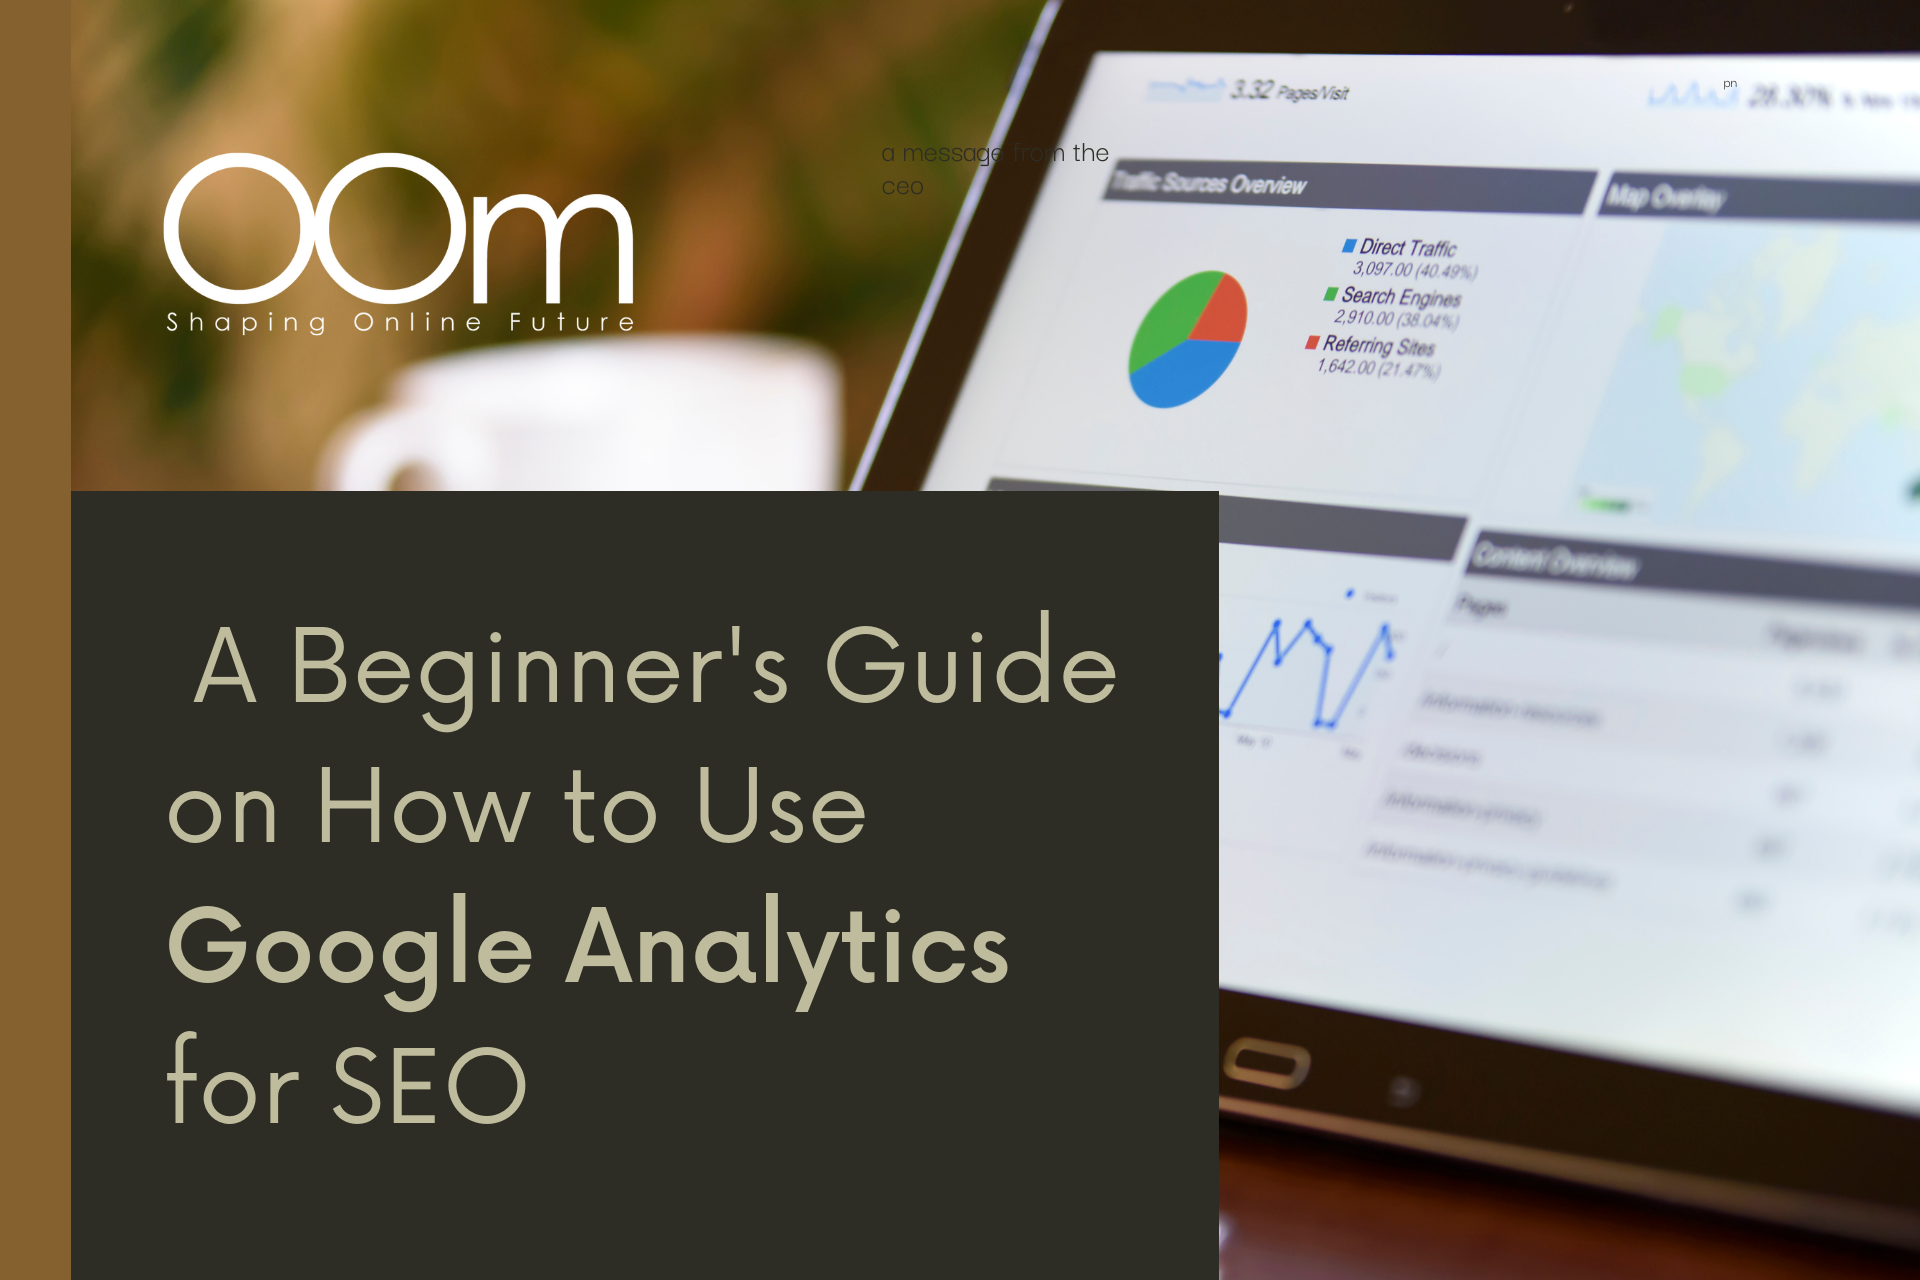 A Beginner's Guide on How to Use Google Analytics for SEO